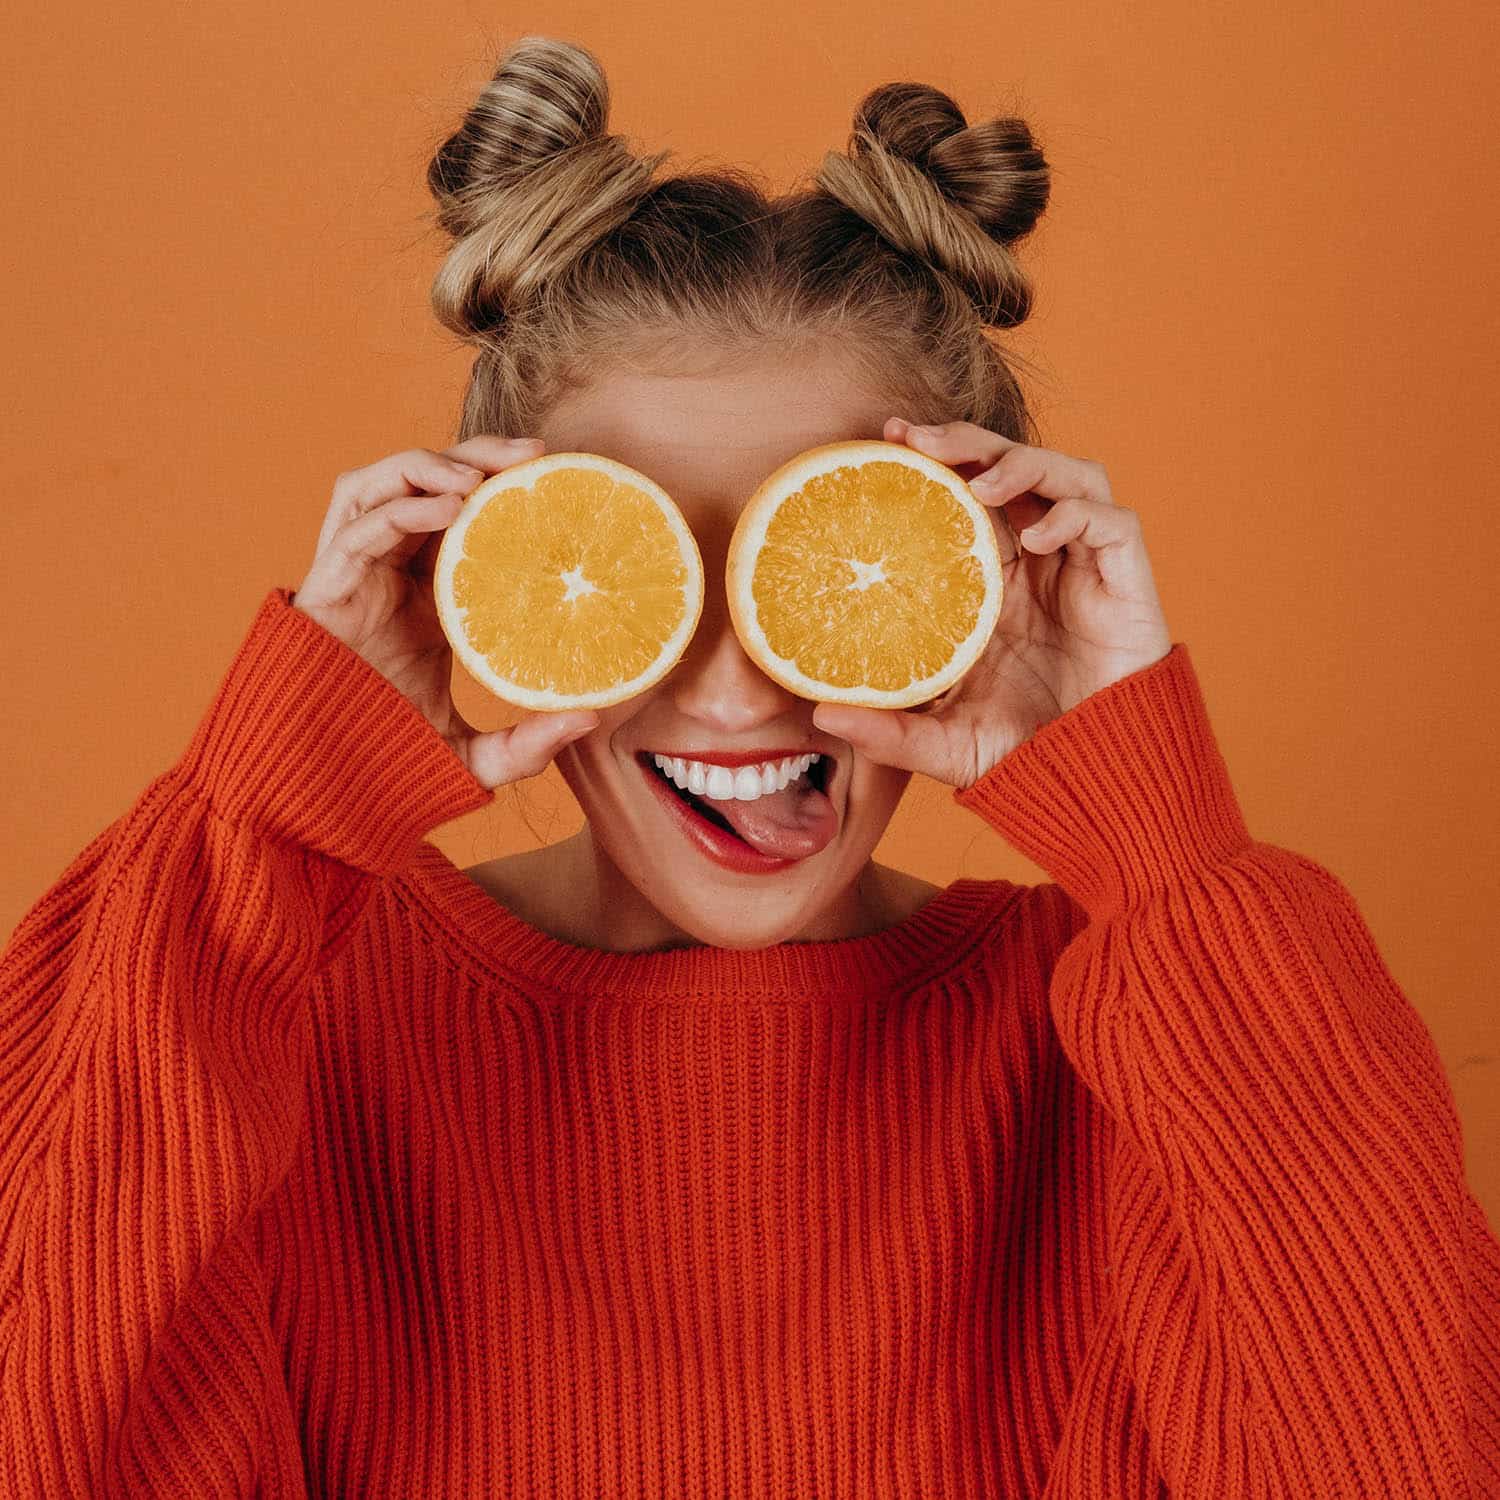 decorative image of woman with orange slices in front of her eyes